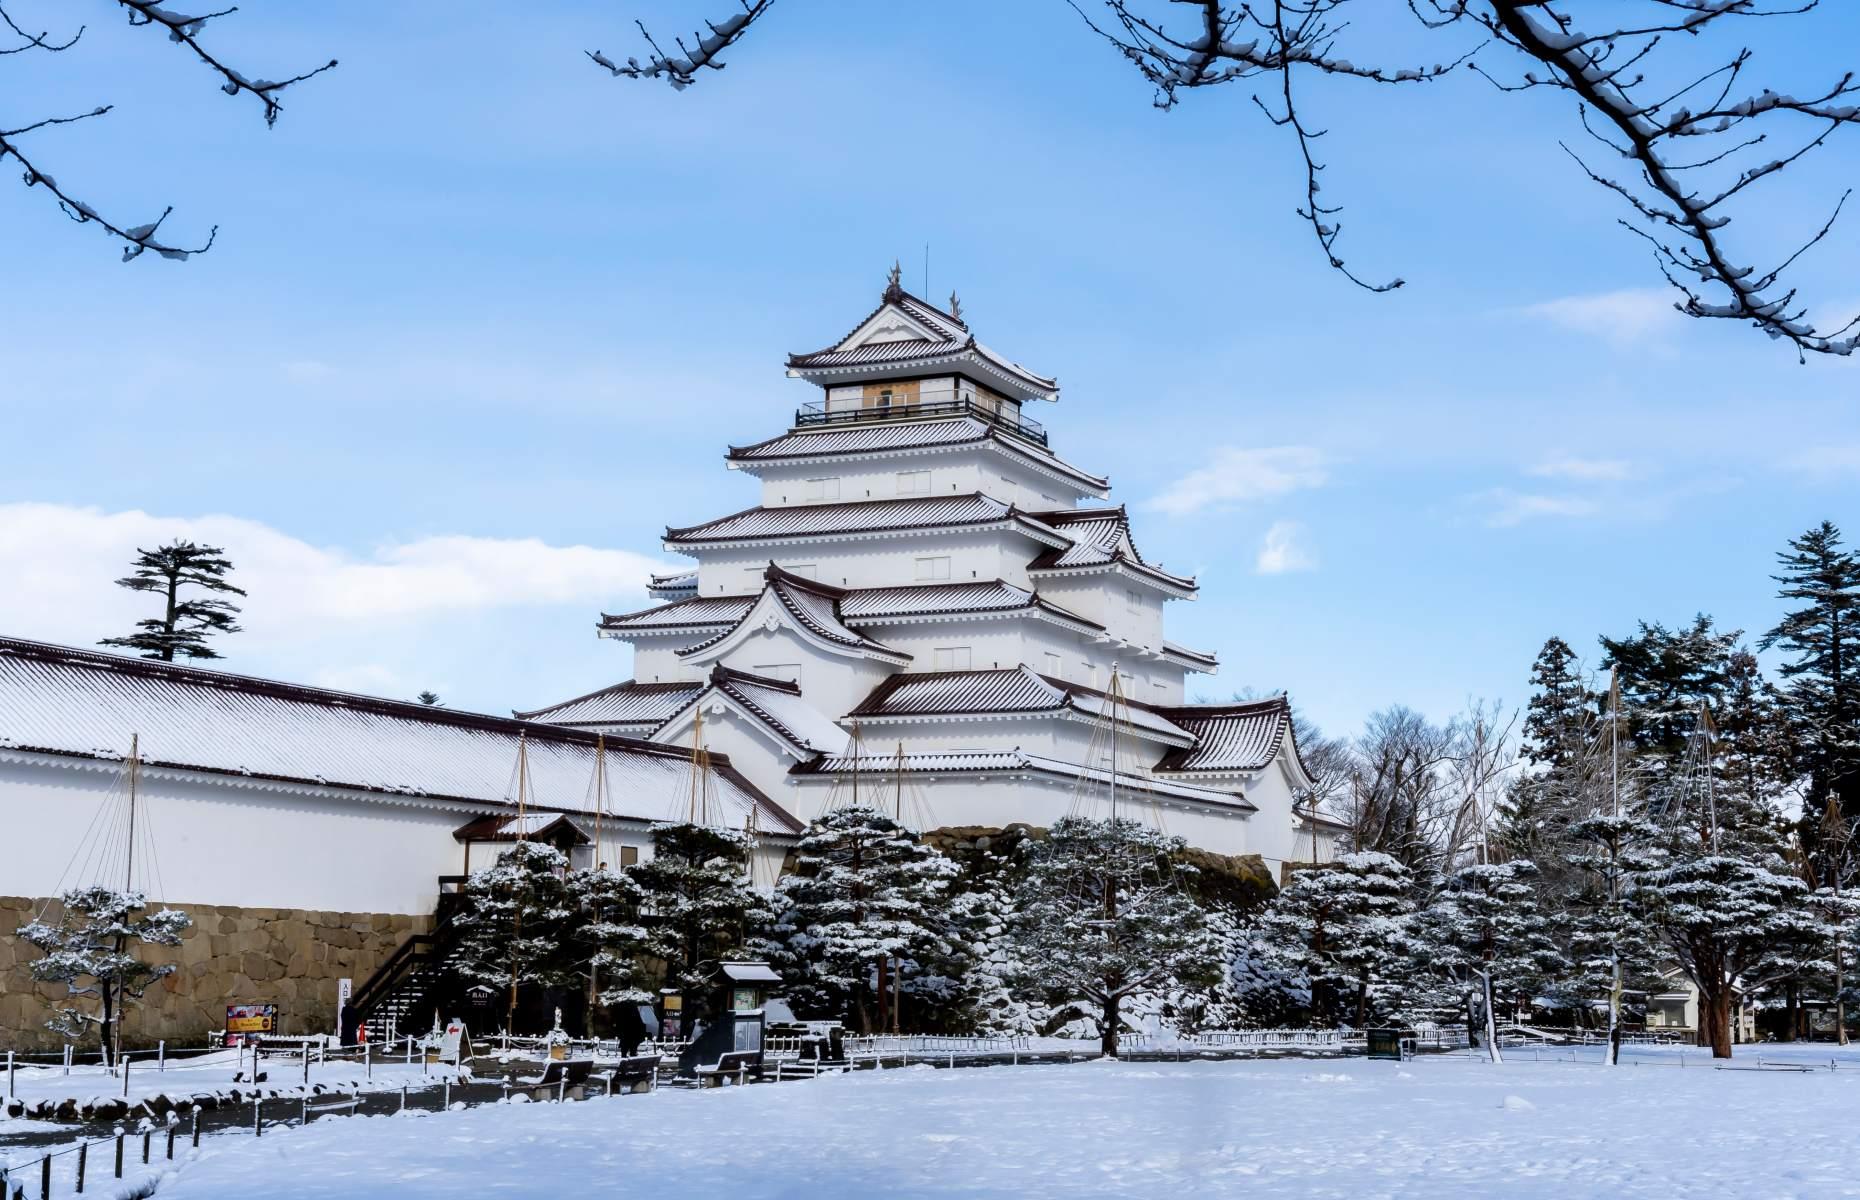 <p>From 16 March 2024, travellers will be able to explore more of Japan’s Hokuriku region via one of the country's world-renowned Shinkansen trains. The Hokuriku branch currently runs between Tokyo and Kanazawa, capital of Ishikawa Prefecture, but is being extended this year from Kanazawa to Tsuruga station in Fukui Prefecture. Located along the northwest coast of Honshu, Japan's main island, the Hokuriku region offers delicious seafood, dramatic mountains, castle towns and culture-rich cities for those intrepid enough to veer off the typical tourist trail.</p>